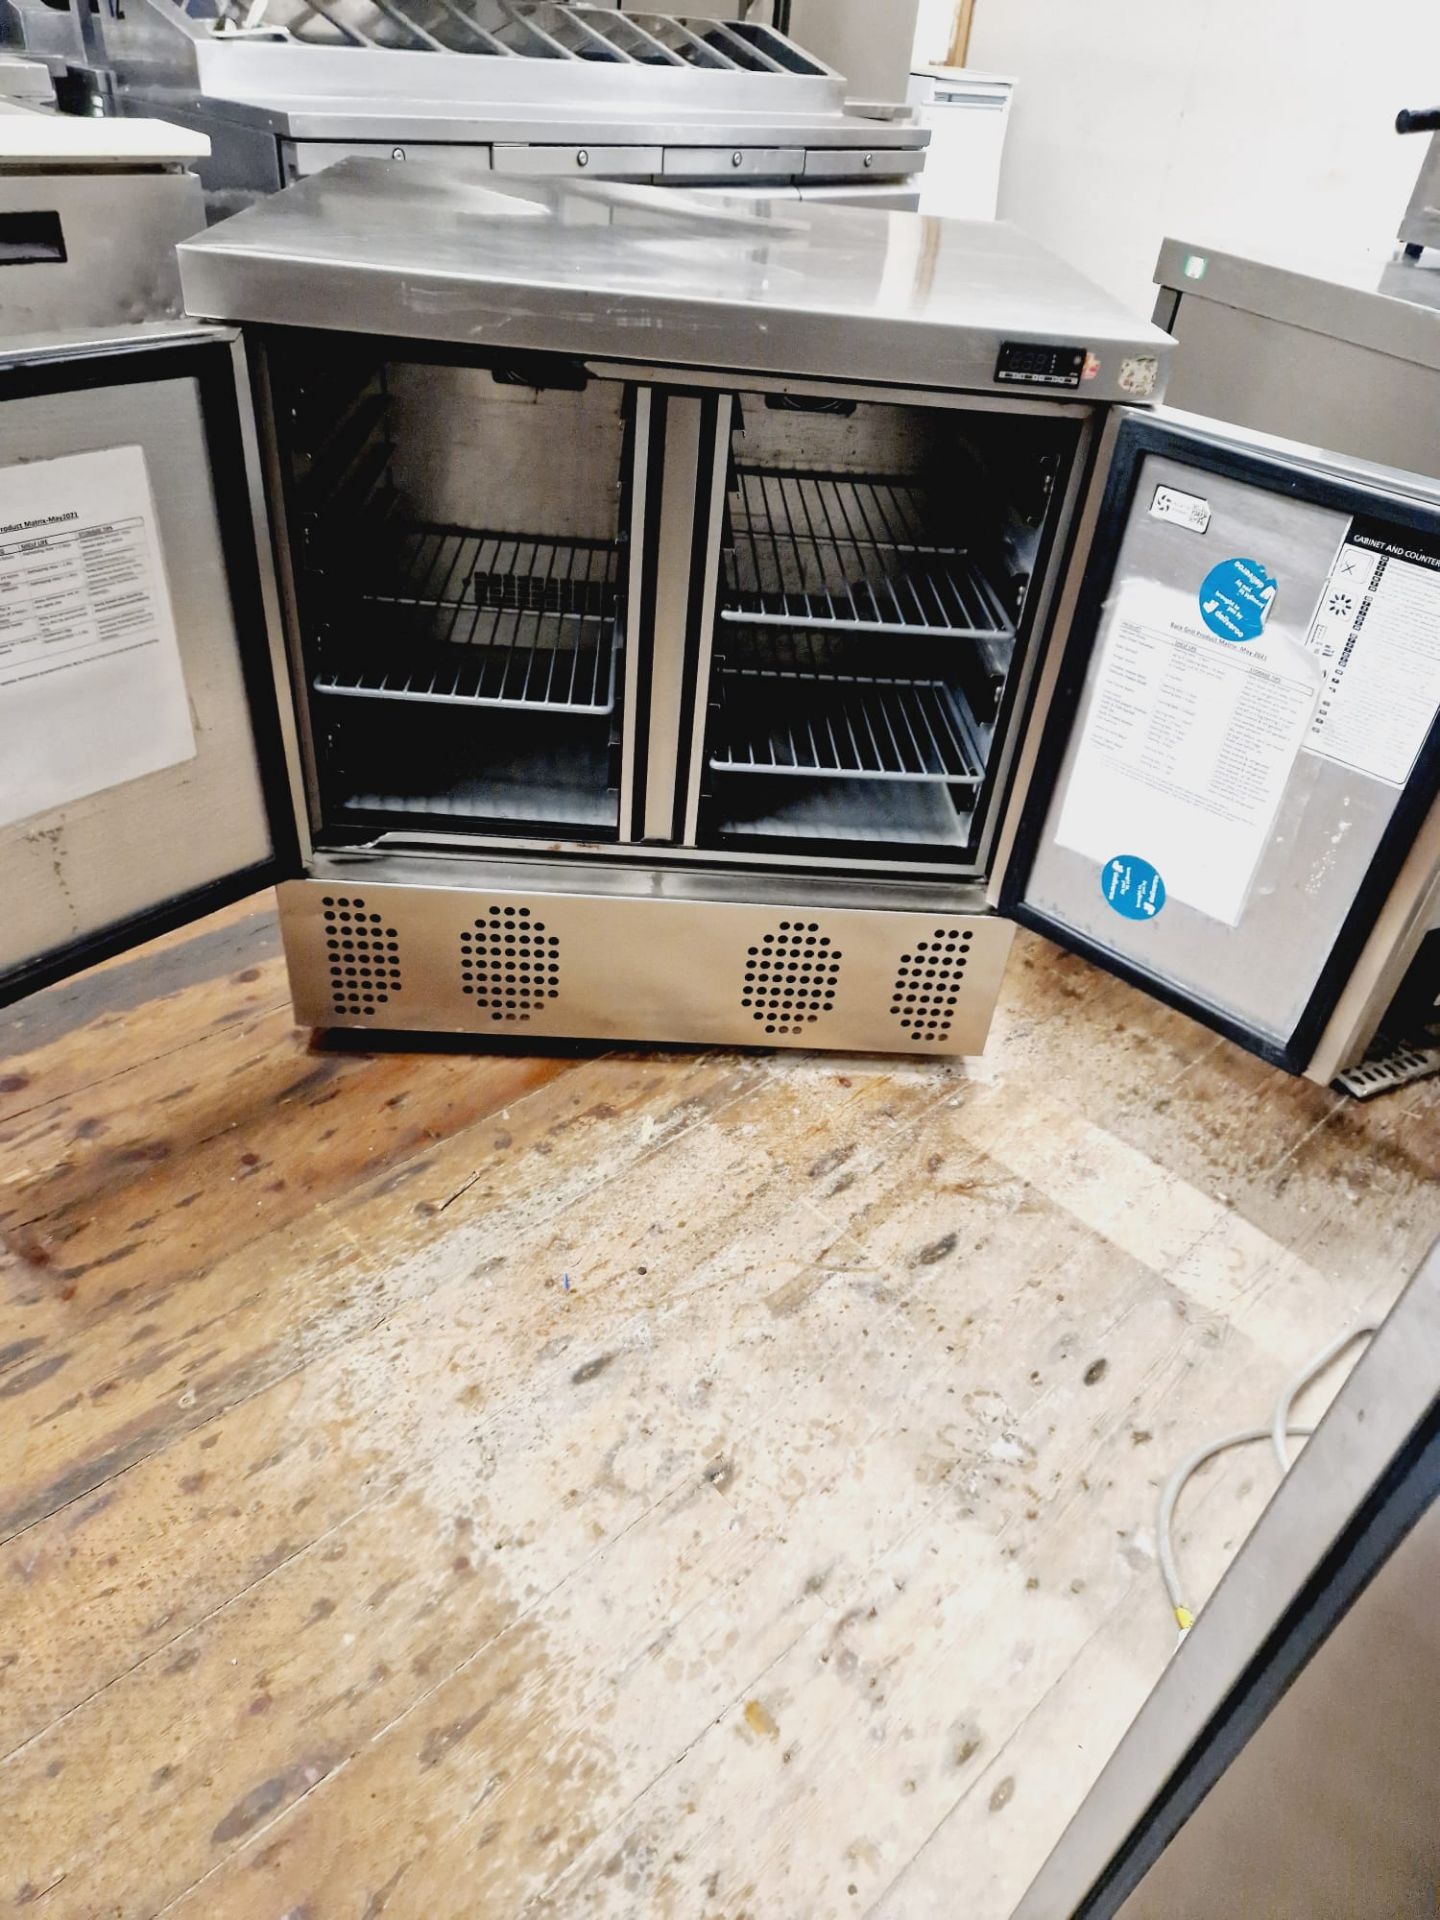 1 X FOSTER HR240 FRIDGE -  ALMOST NEW CONDITION  AND WORKING  AND SERVICED  - Image 2 of 5